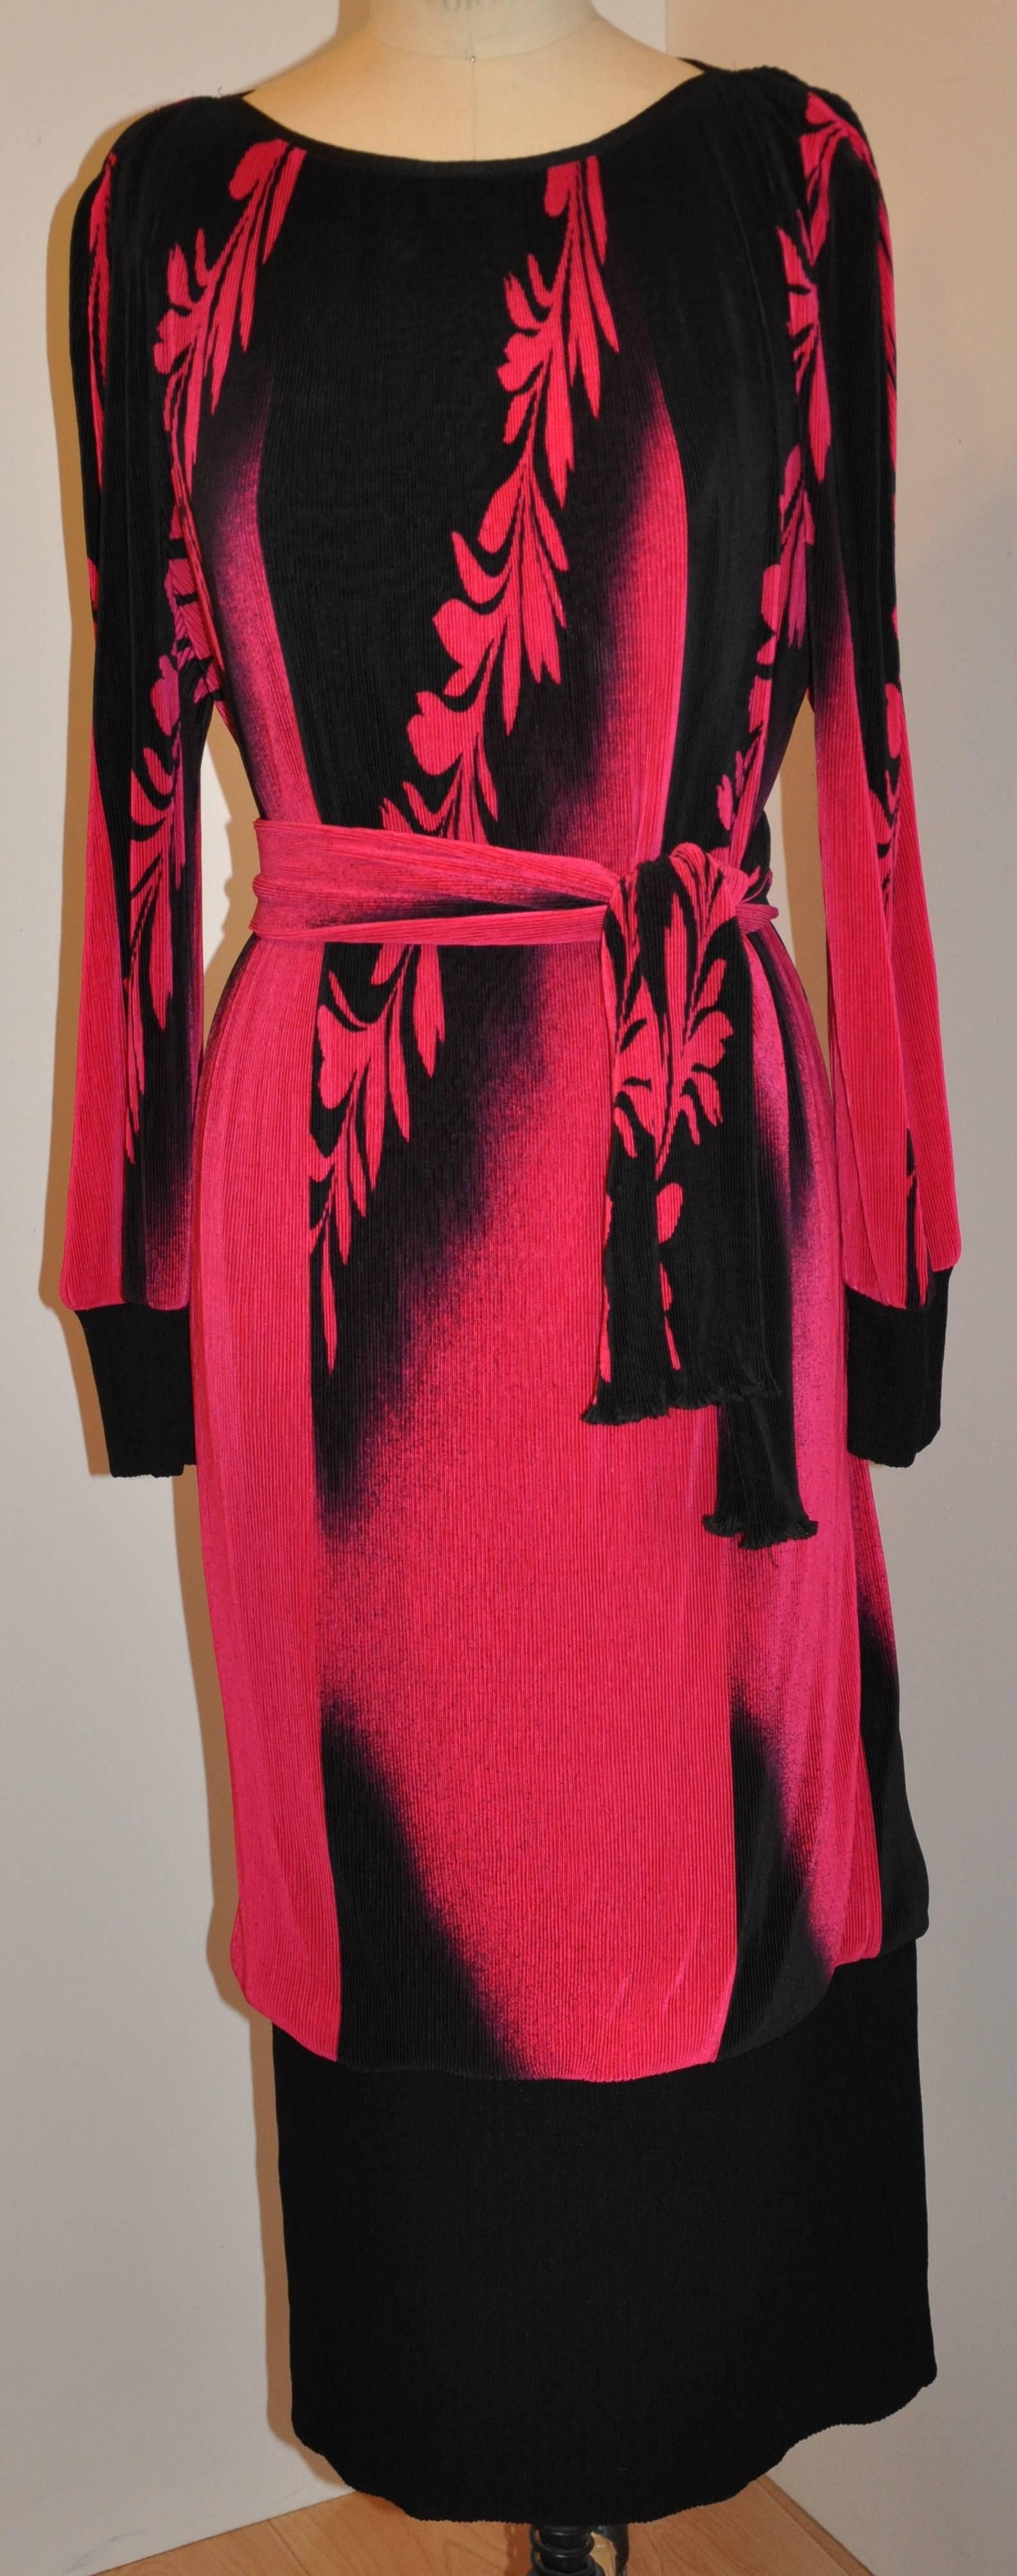        Virginie (Paris) wonderful elegant boatneck accordian dress is fully lined. This lovely dress has an optional self-tie belt in which one can use as a tie-belt, or, as a scarf if desired. A wonderful combination of fuchsia and black, this